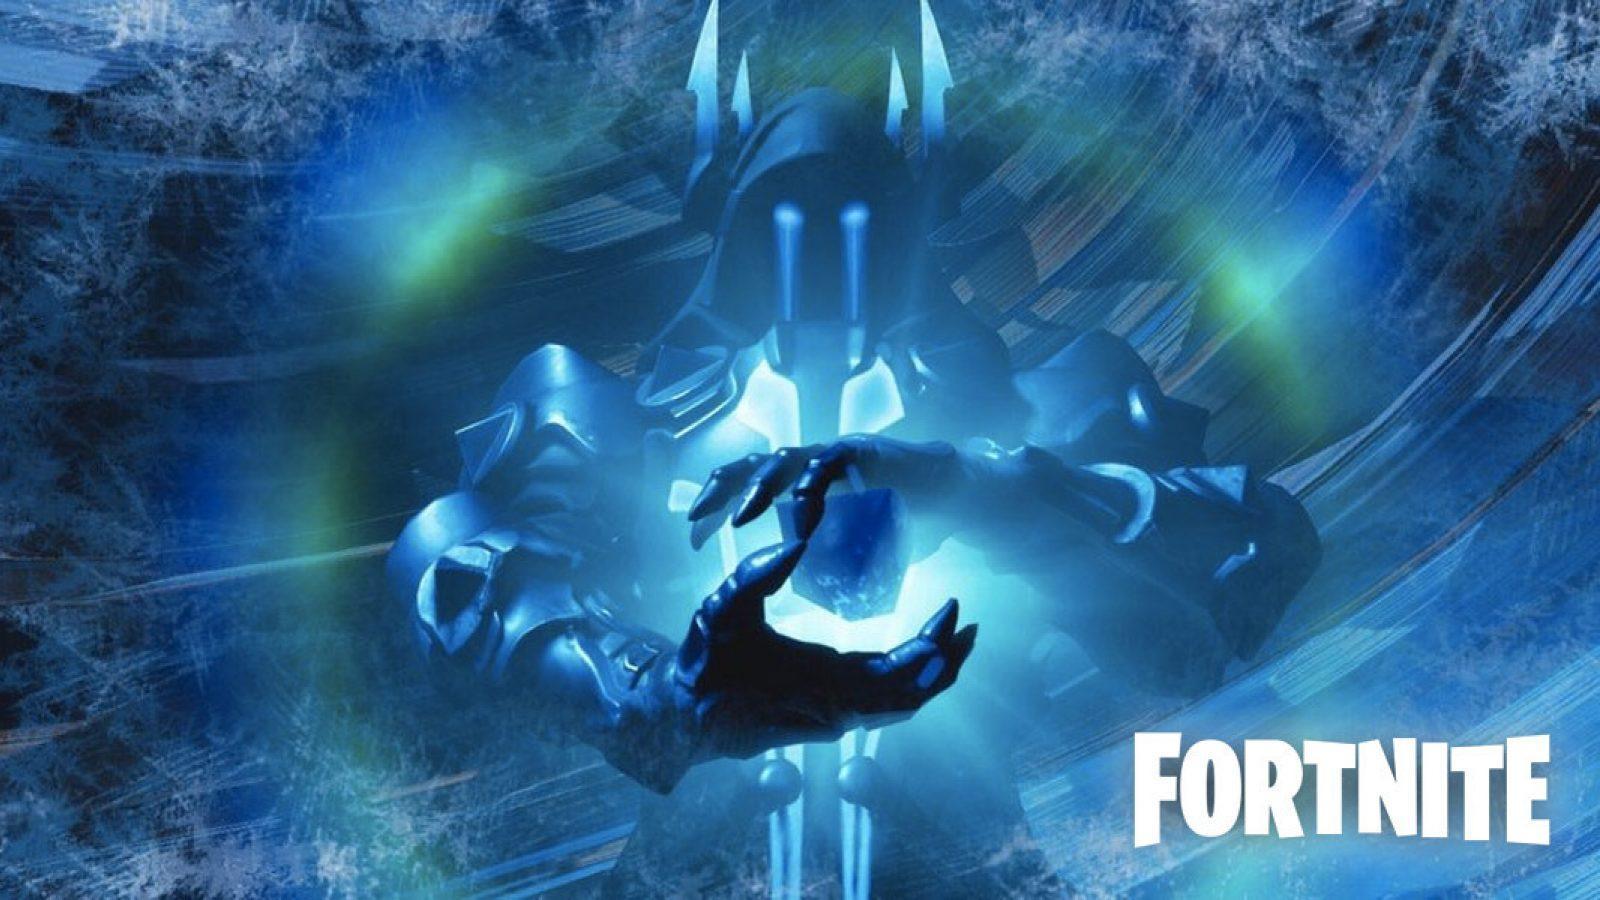 Ice Storm LTM added to Fortnite with ice sphere live event. Dexerto